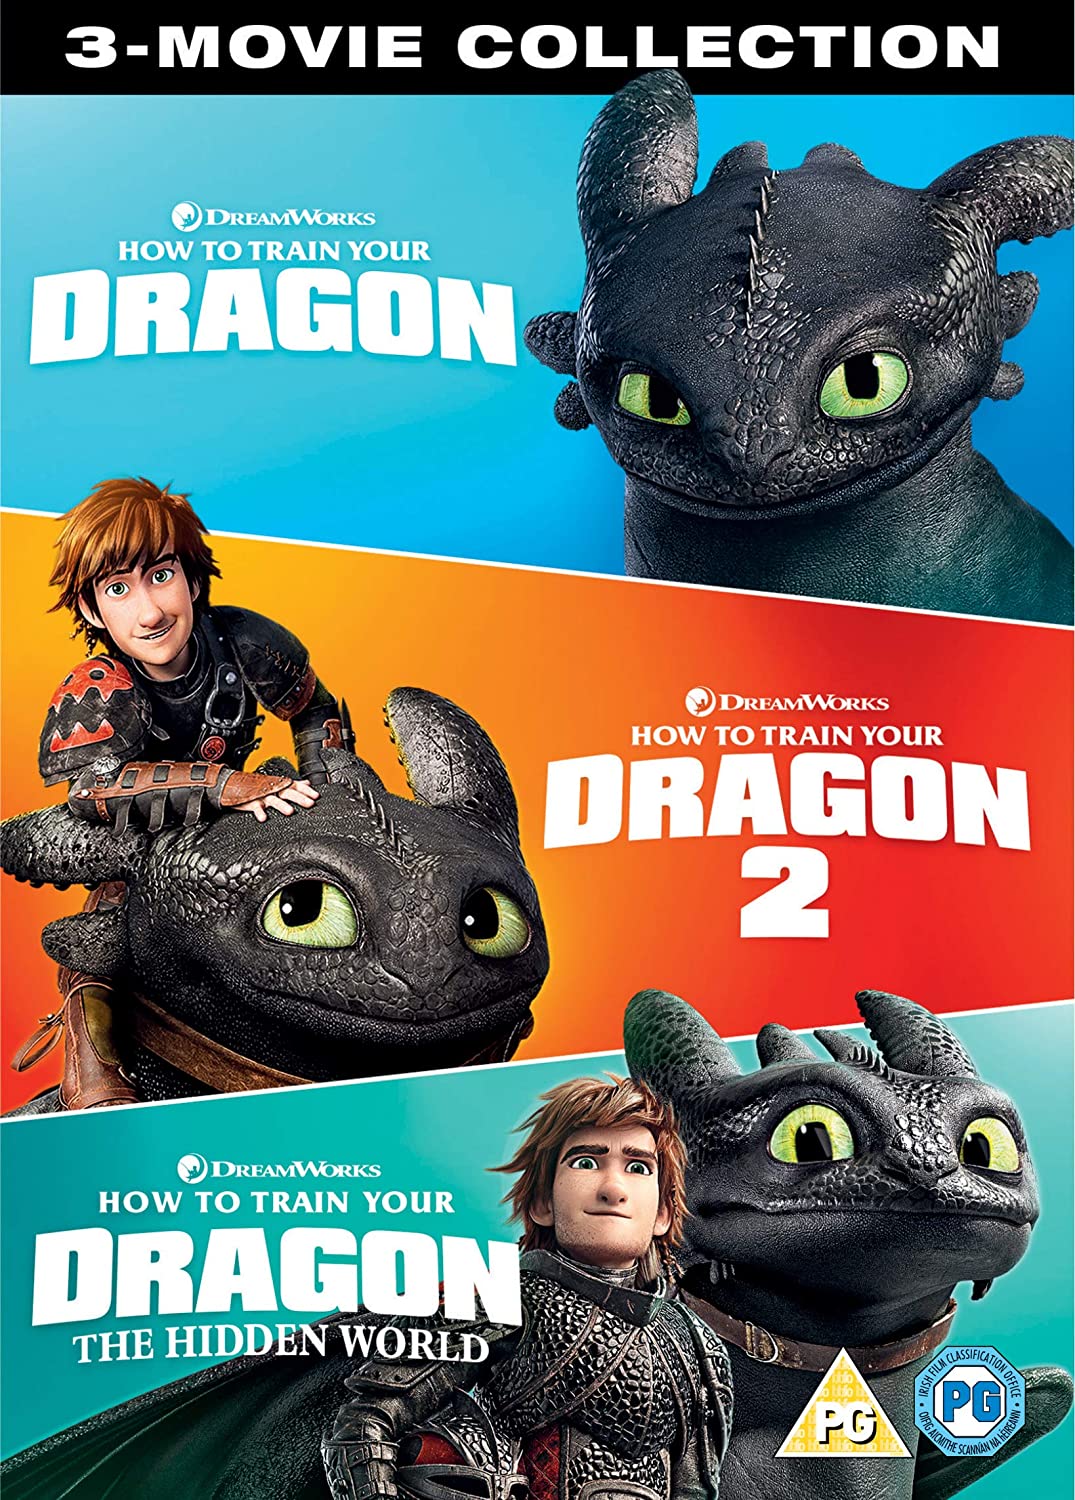 How to Train Your Dragon - 3 Movie Collection - Family/Adventure [DVD]